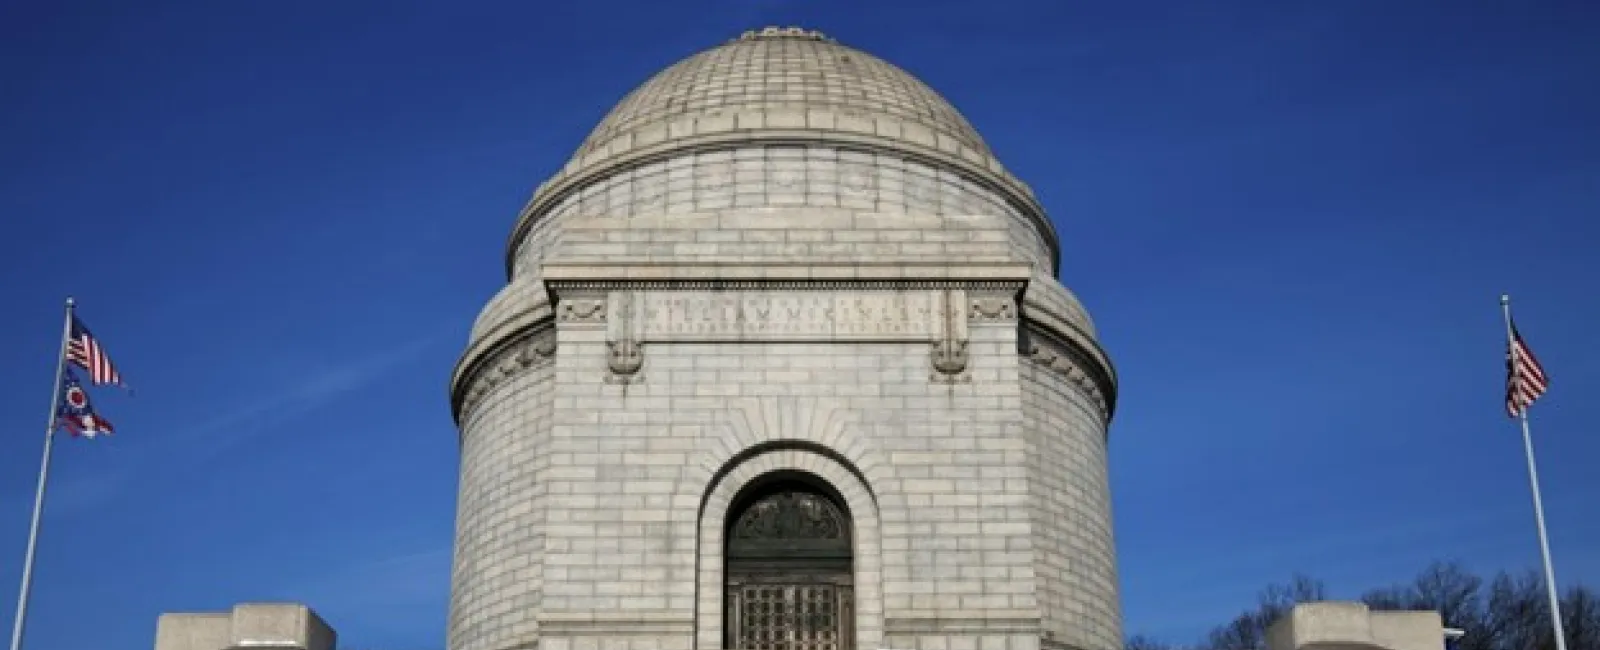 a stone building with a dome and flags on the top with McKinley National Memorial in the background